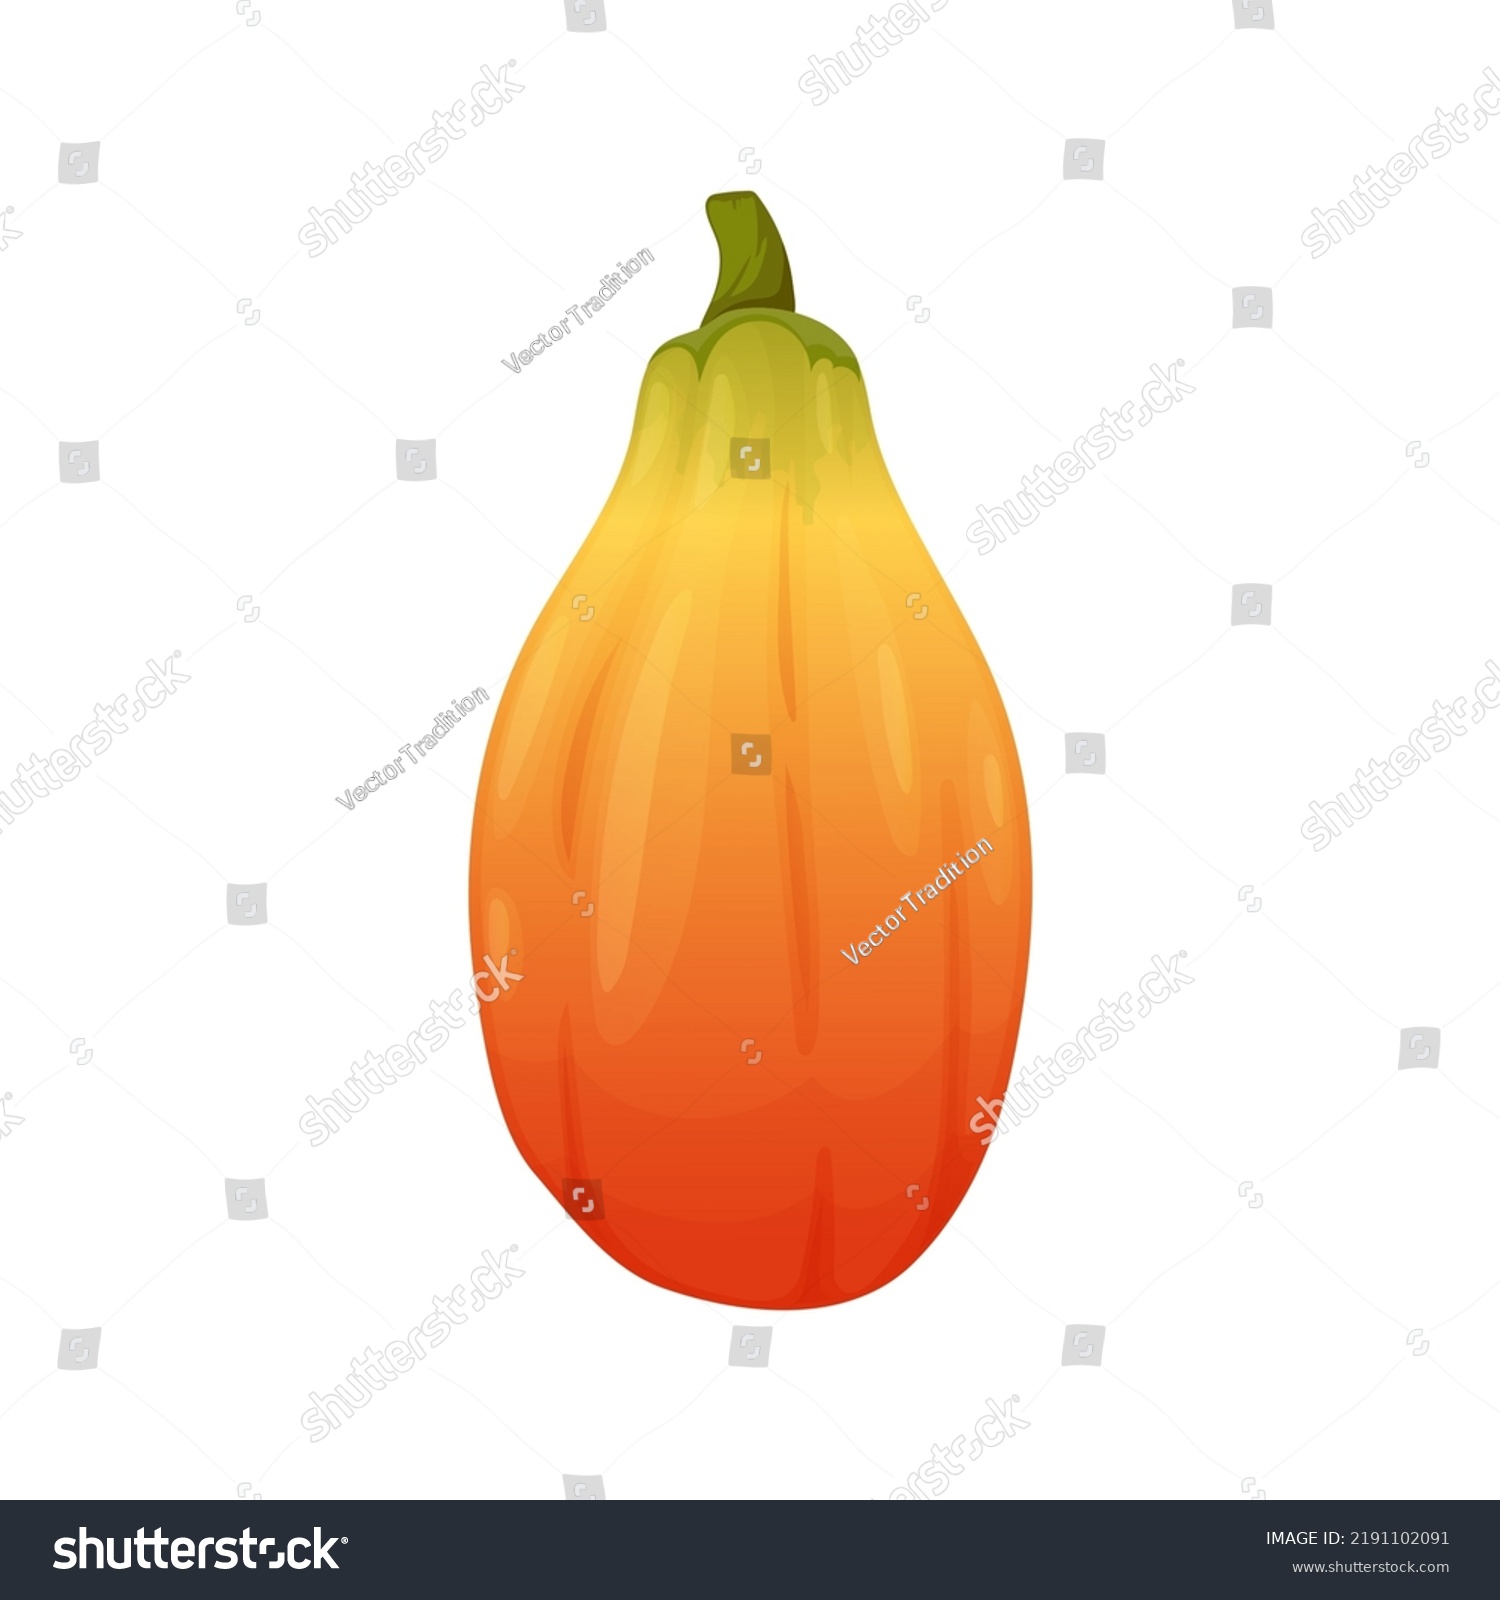 Pawpaw Tropical Fruit Isolated Papaya Exotic Stock Vector Royalty Free 2191102091 Shutterstock 7807